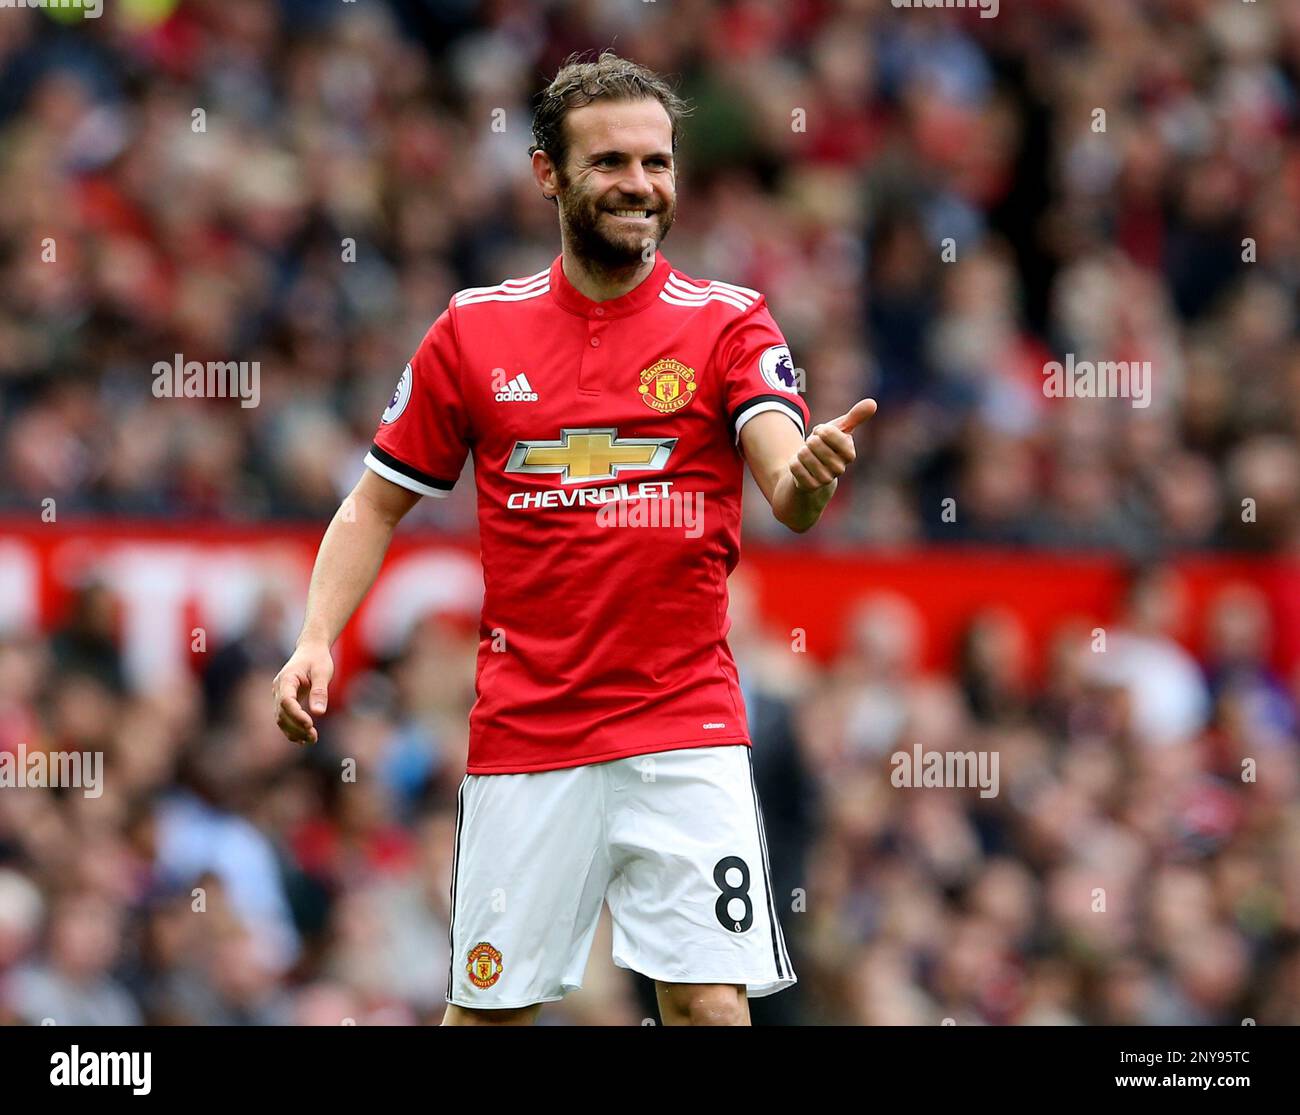 September 17, 2017 - Manchester, United Kingdom - Juan Mata of Manchester  United during the premier league match at the Old Trafford Stadium,  Manchester. Picture date 17th September 2017. Picture credit should